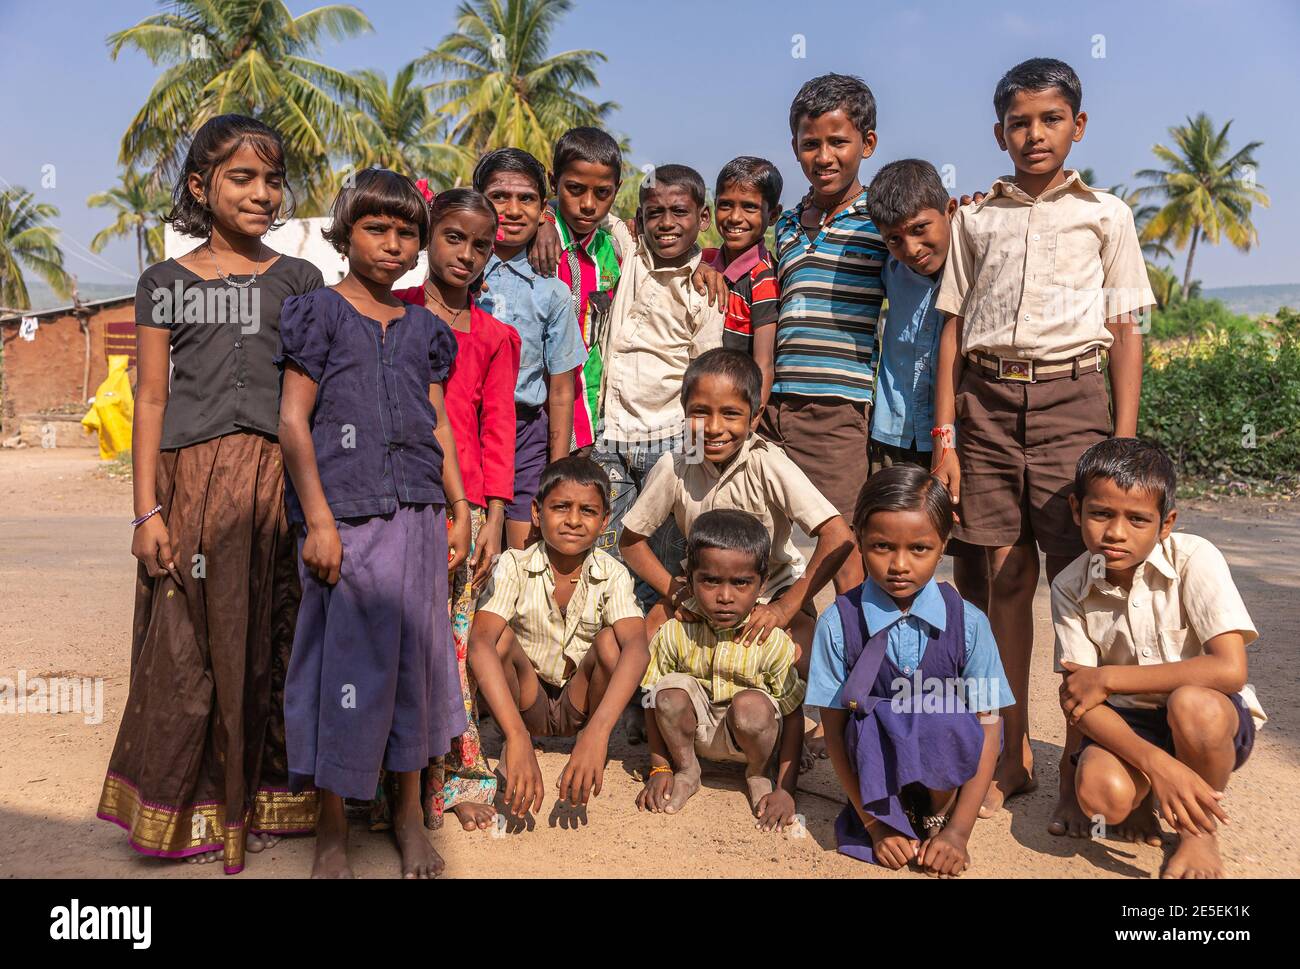 Siddanakolla, Karnataka, India - November 7, 2013: Large group of children, boys and girls pose together under blue sky. Clothing adds color. Some gre Stock Photo